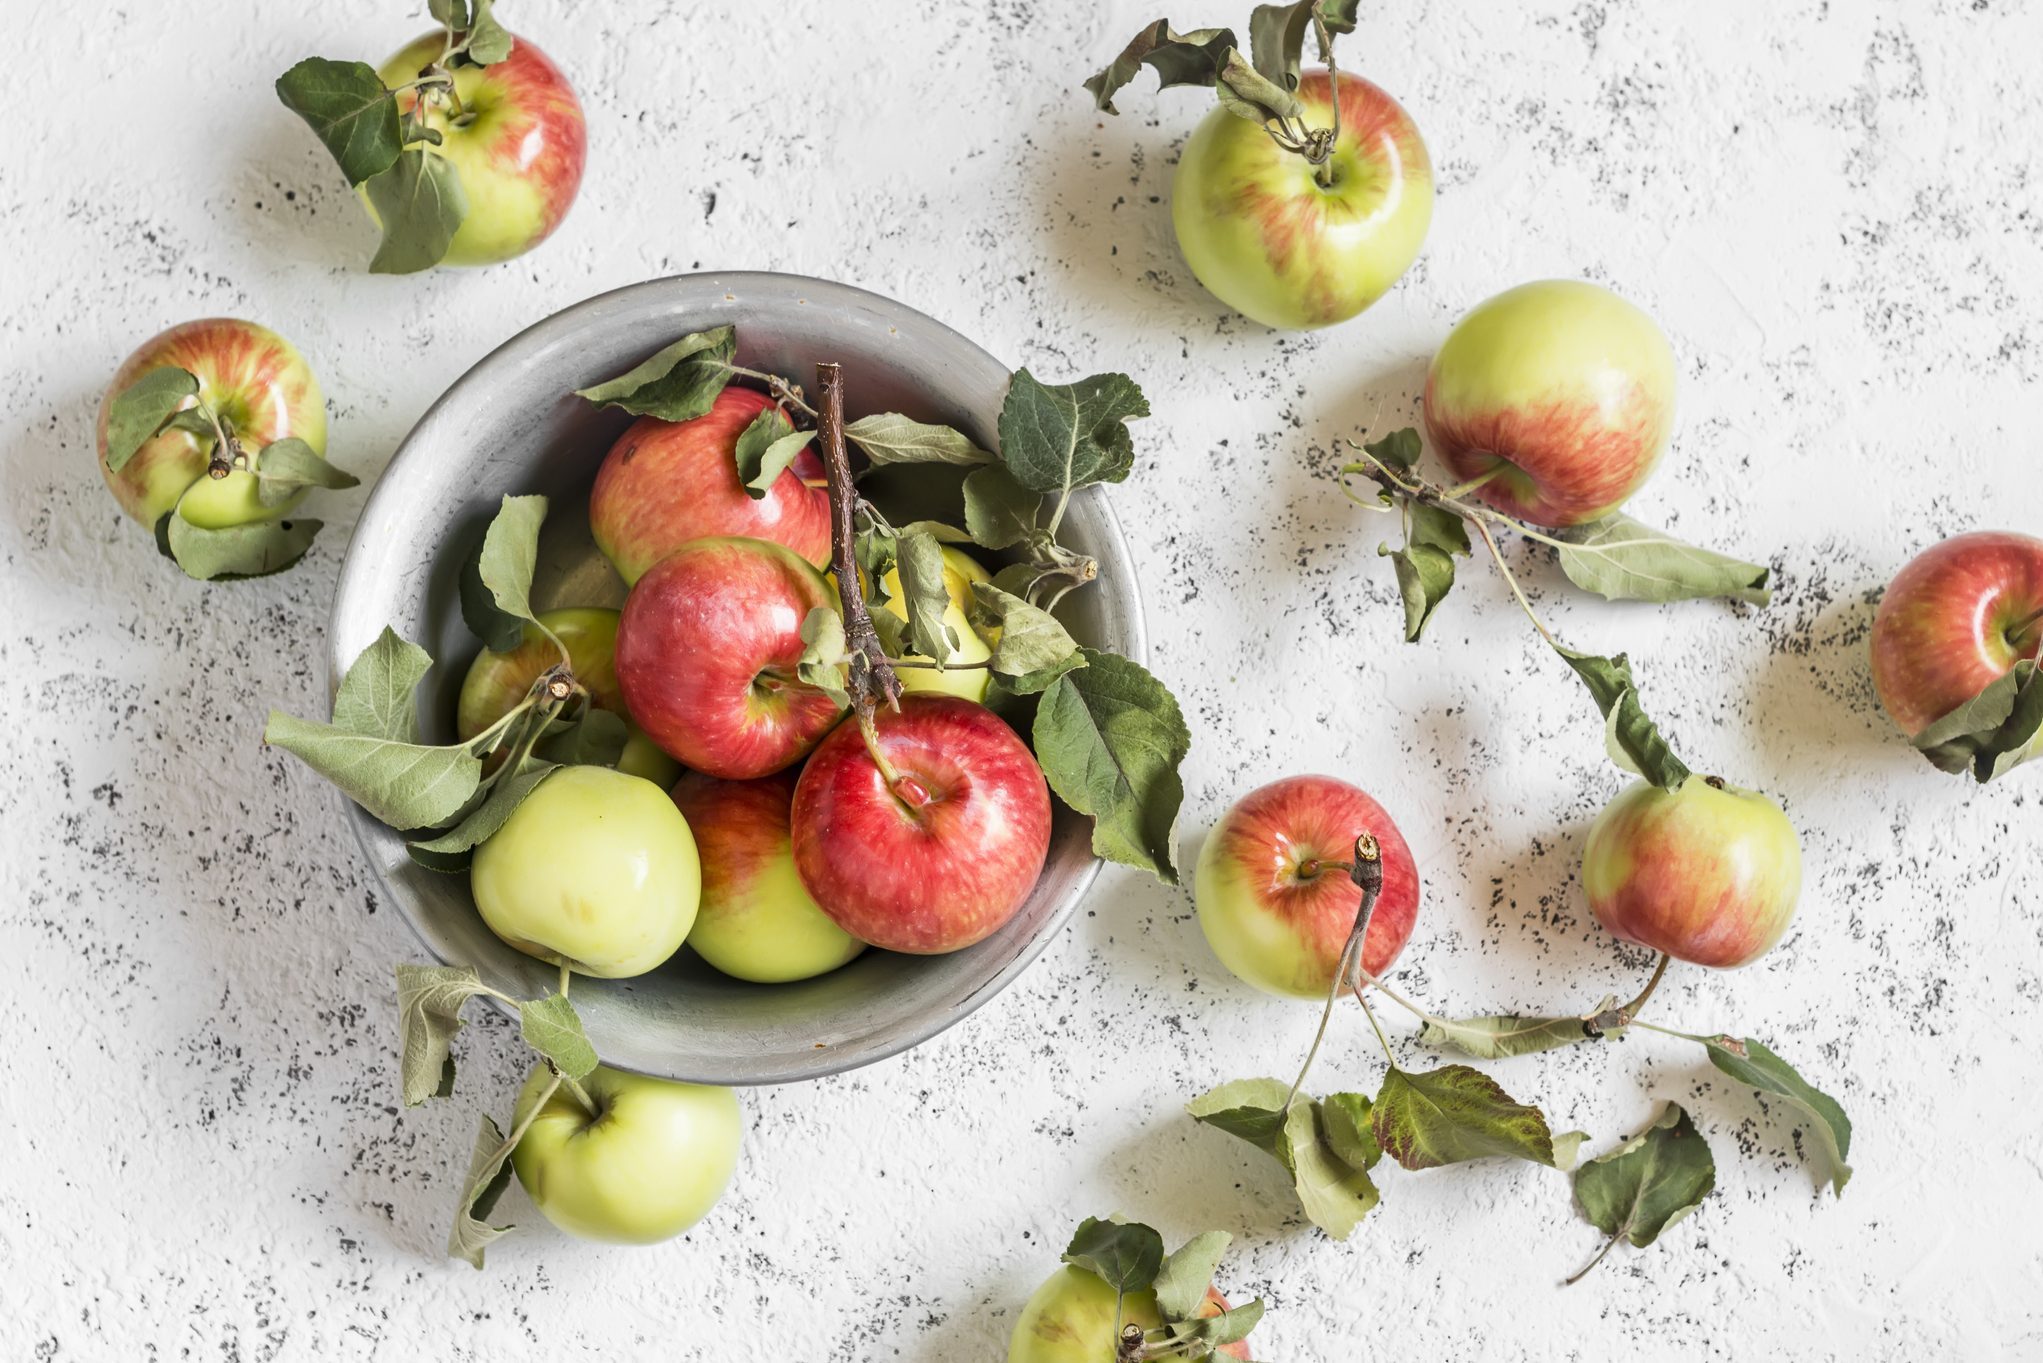 Fresh garden apples on a light background. Rustic style.